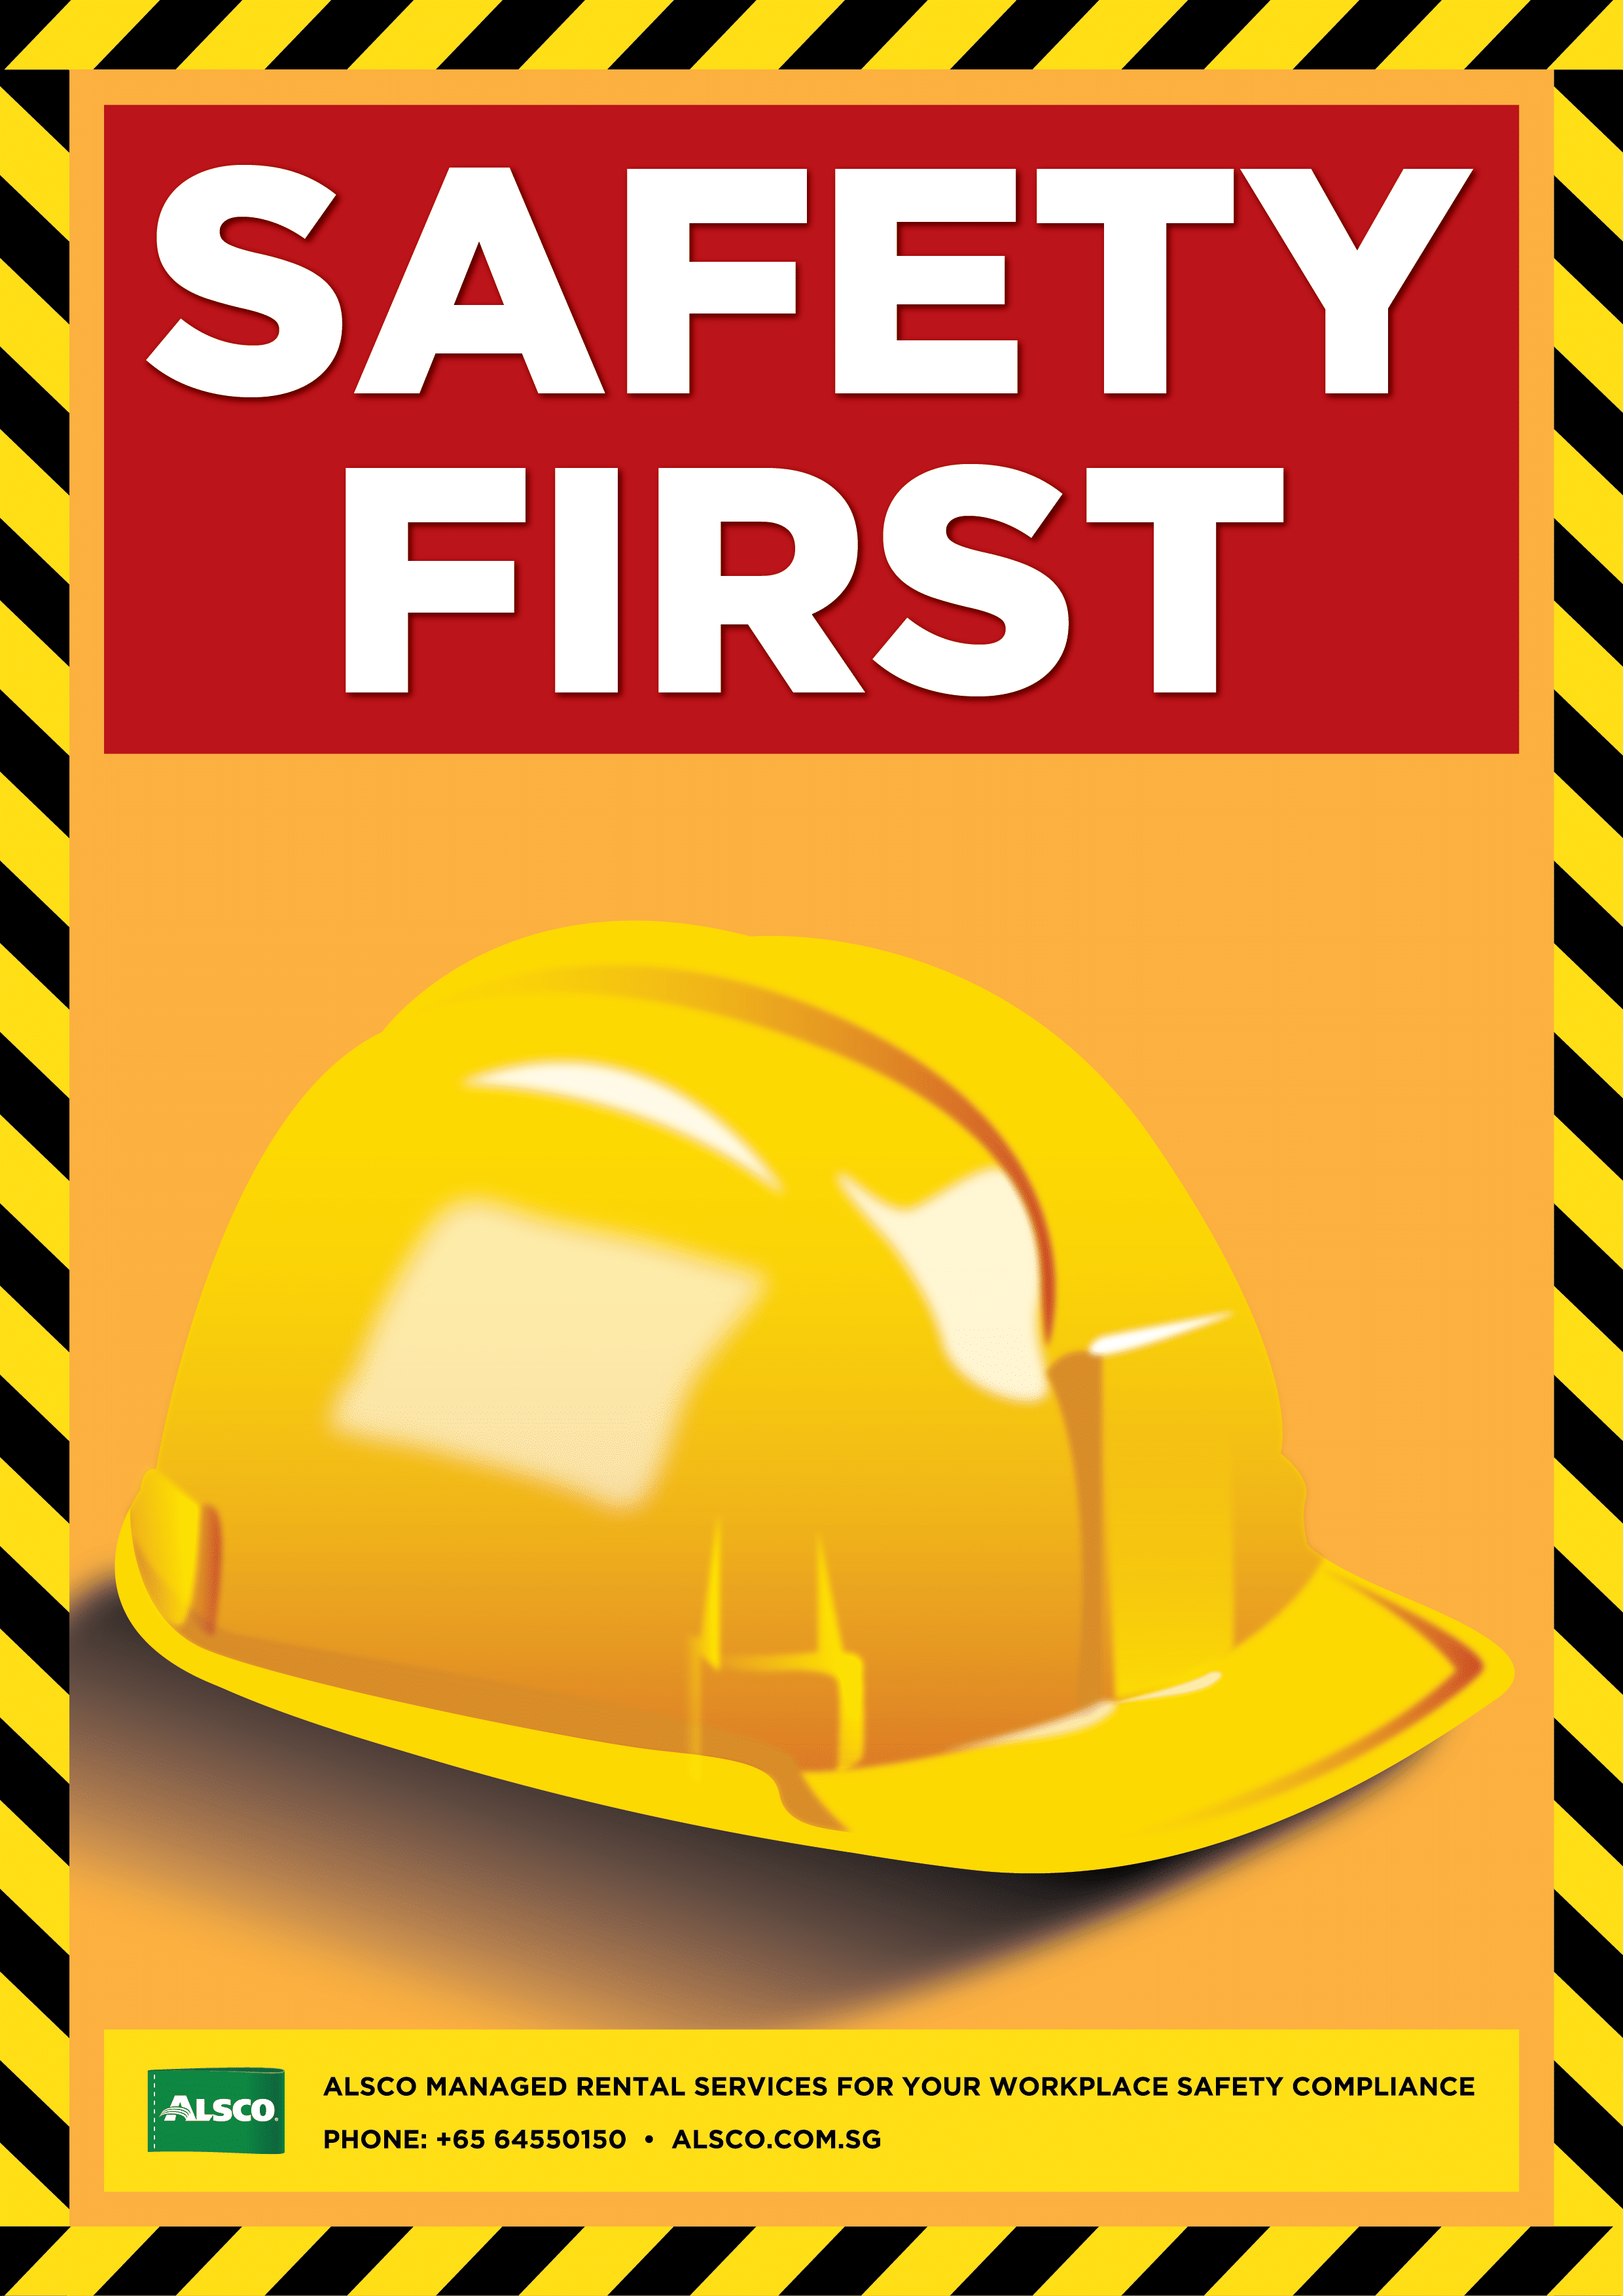 Safety Poster HD Image & Videos Gallery